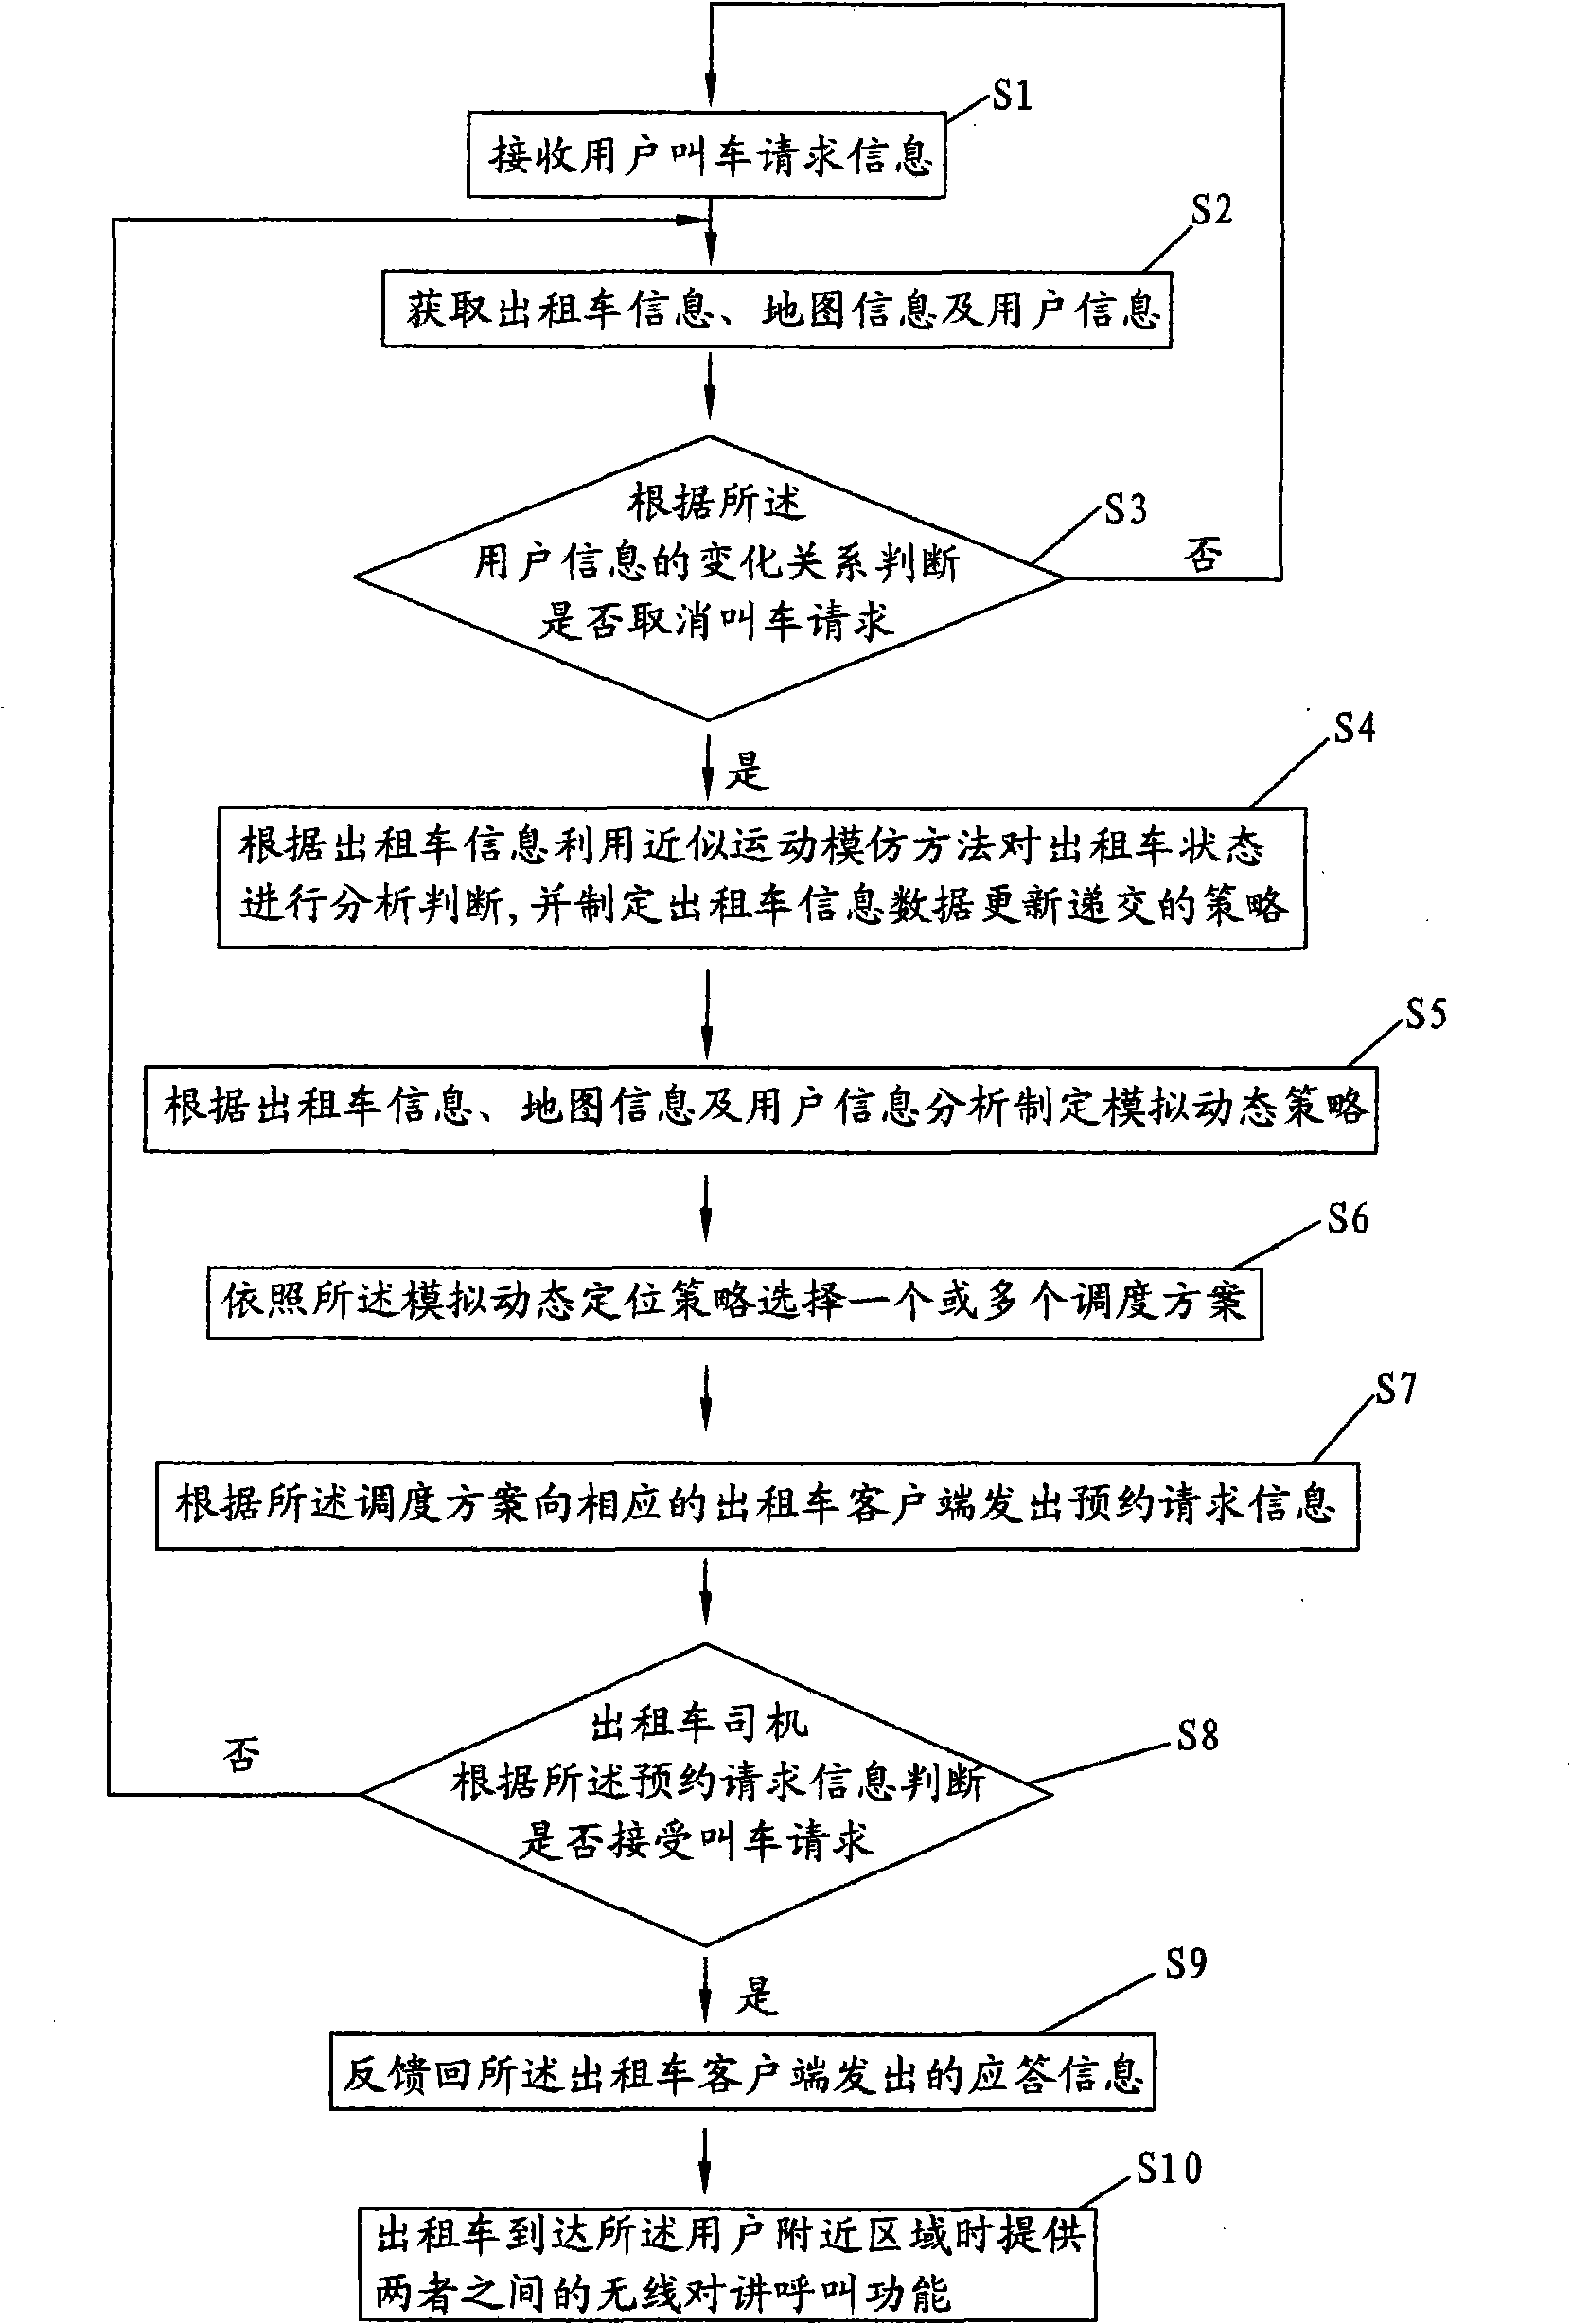 Bi-end satellite positioning communication and cab scheduling method and system by centralized scheduling